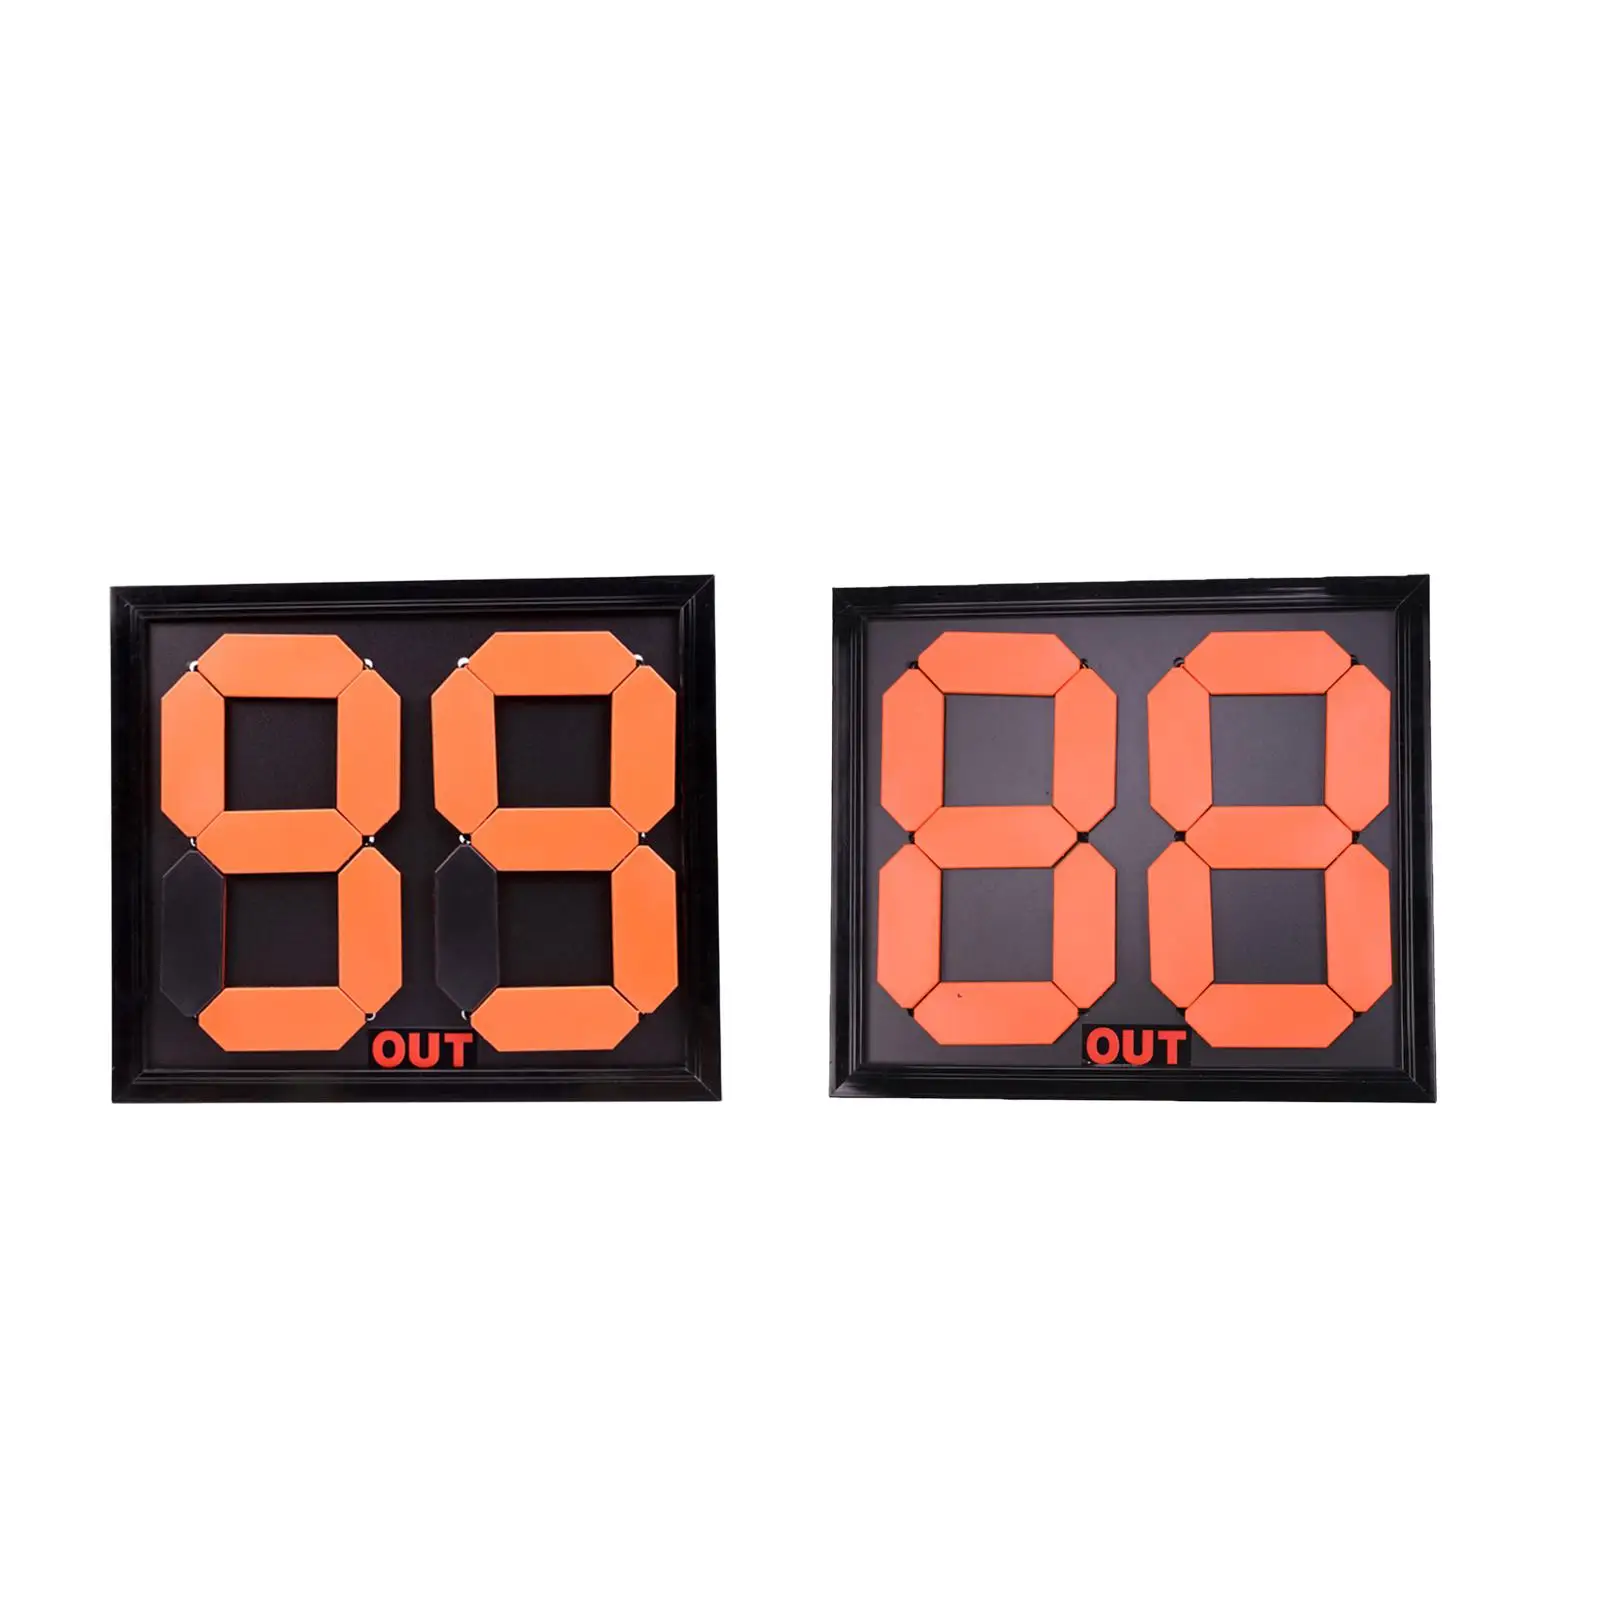 2Pcs Soccer Football Substitution Board Soccer Game Basketball Game Electronic Scoreboard